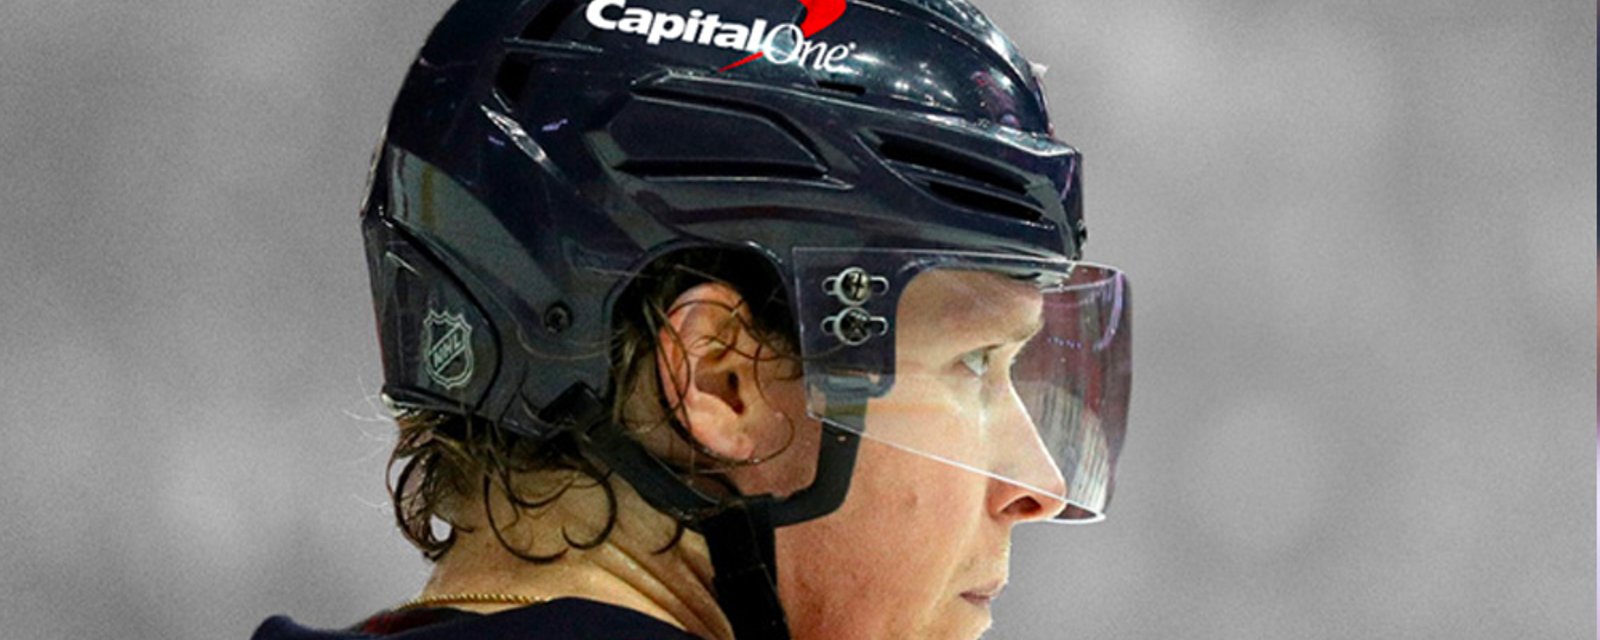 Report: Ads on helmets just the beginning, NHL planning “aggressive” money-making ideas 